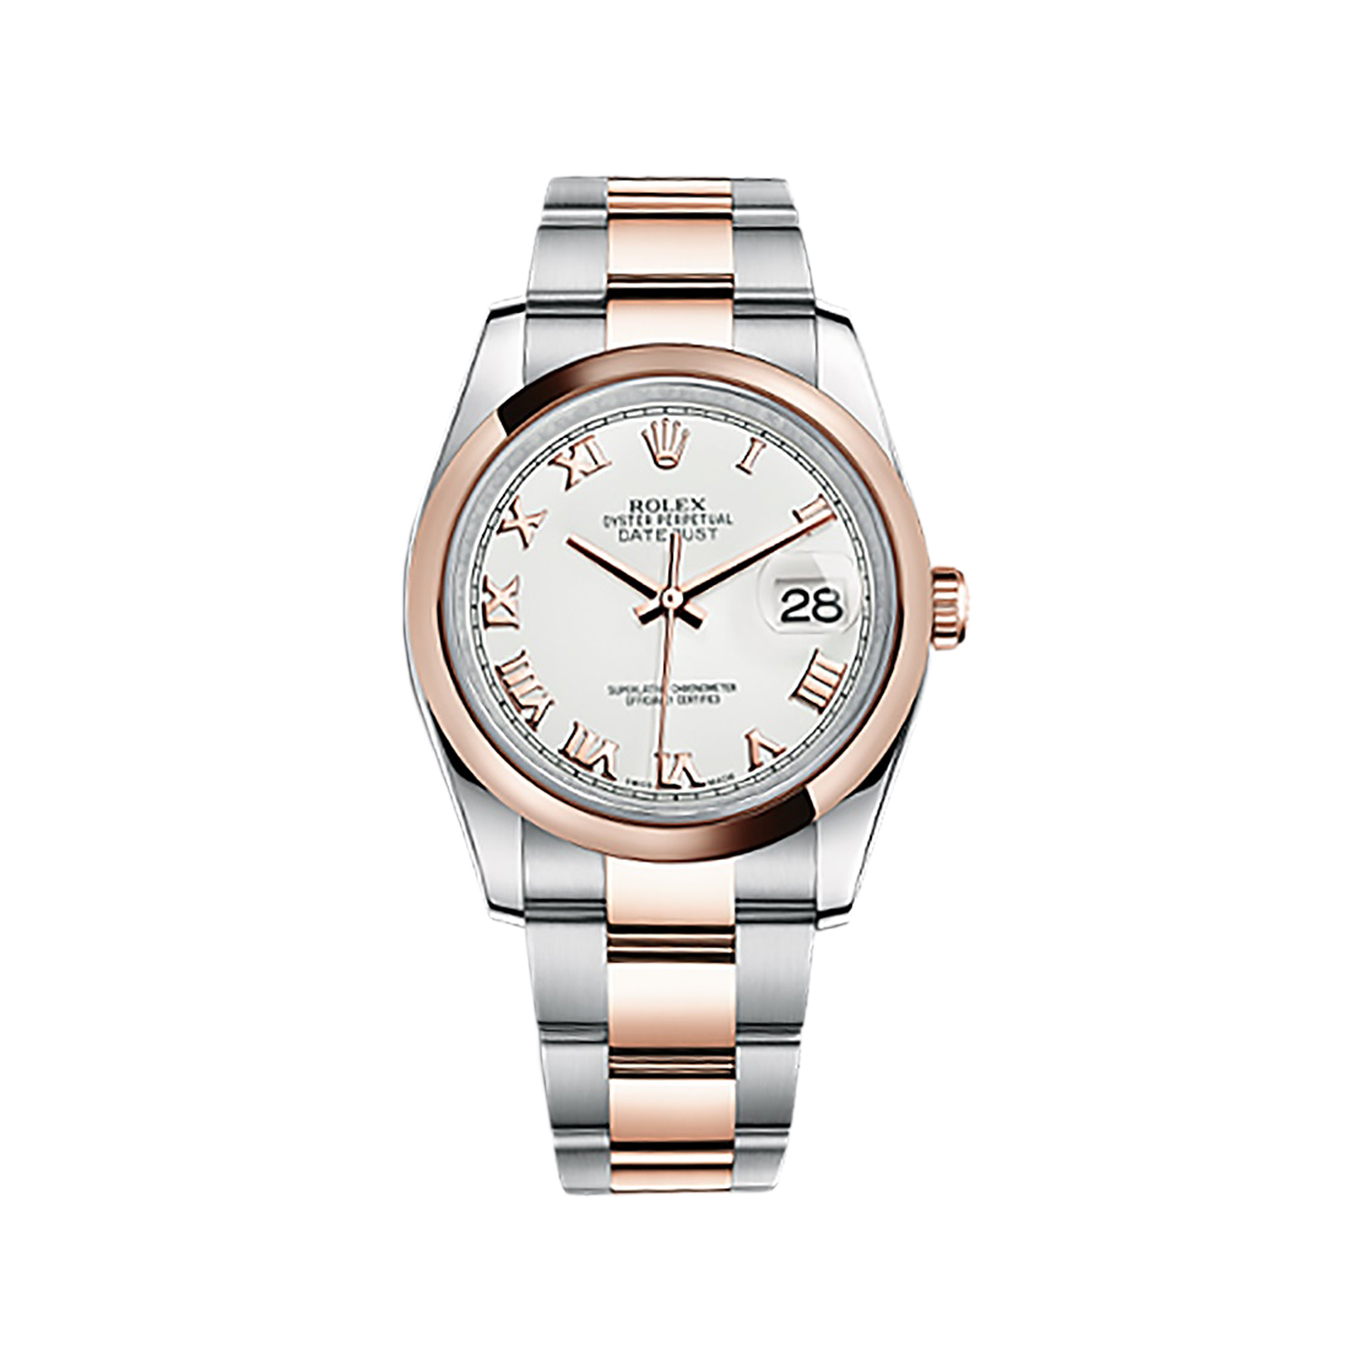 Datejust 36 116201 Rose Gold & Stainless Steel Watch (White)